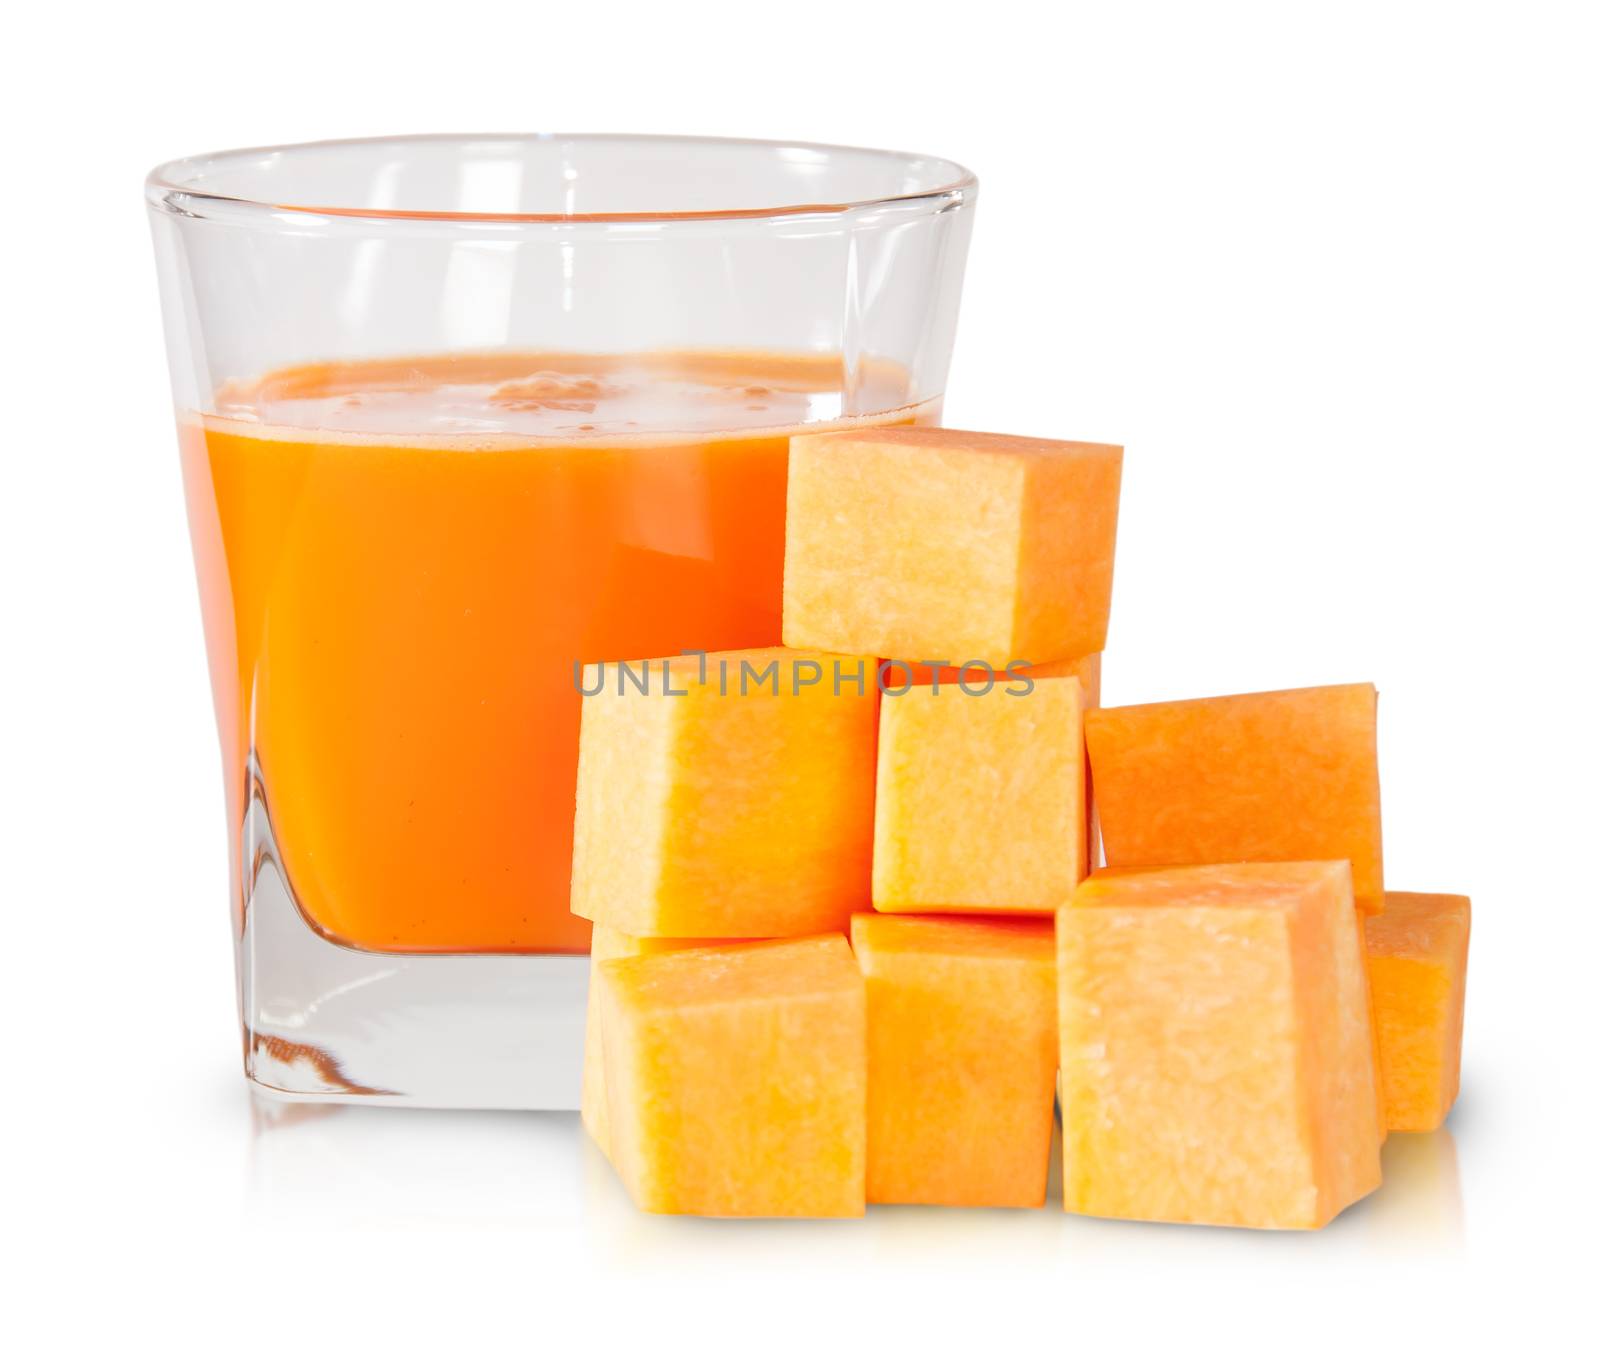 Pumpkin Diced And A Glass Of Pumpkin Juice Isolated On White Background